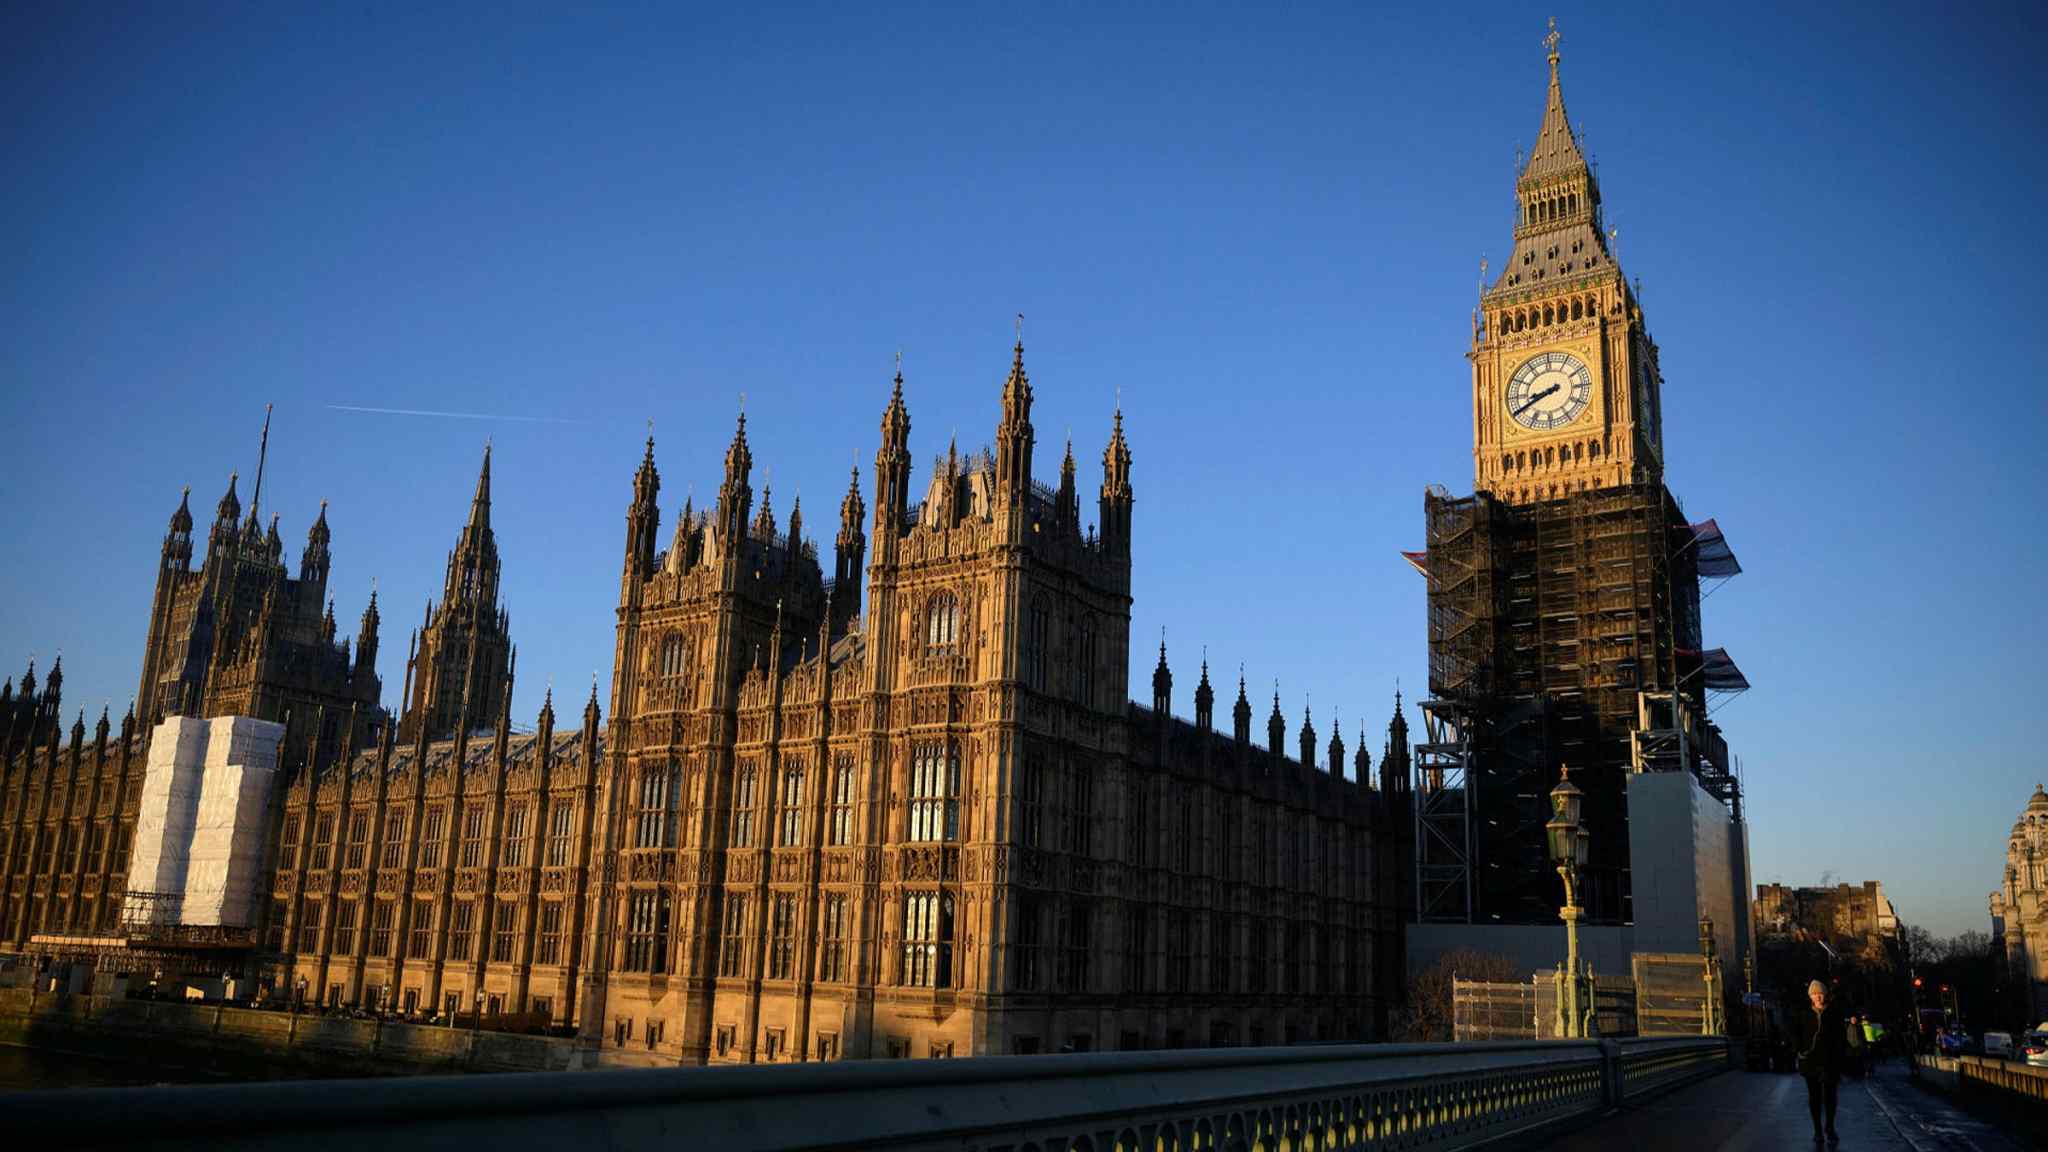 Live news: Blackmail in parliament ‘unacceptable’ and ‘unlikely’, says UK minister